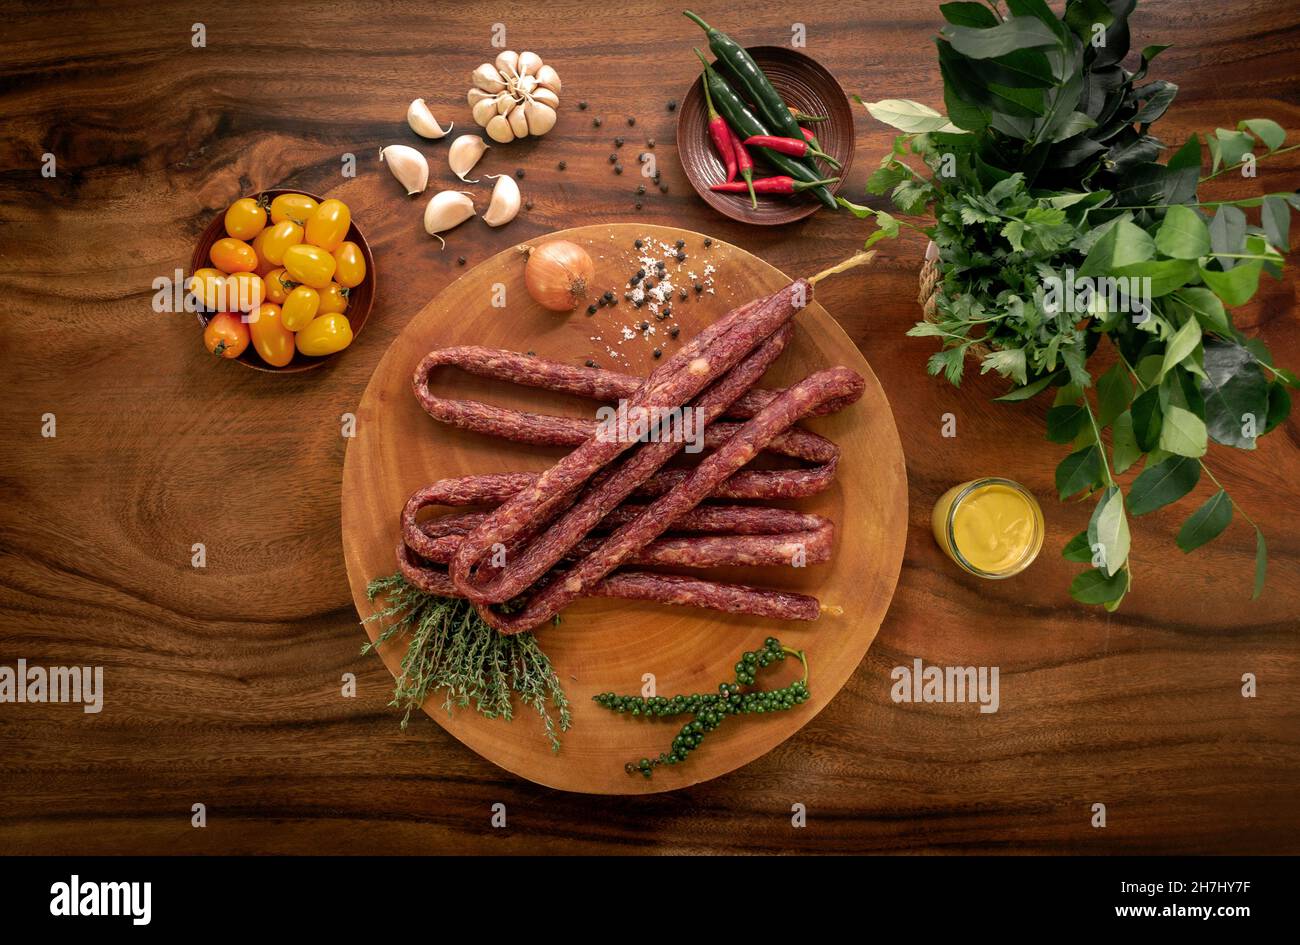 polish beef kabanos sausages on rustic wood table with natural ingredients arrangement Stock Photo